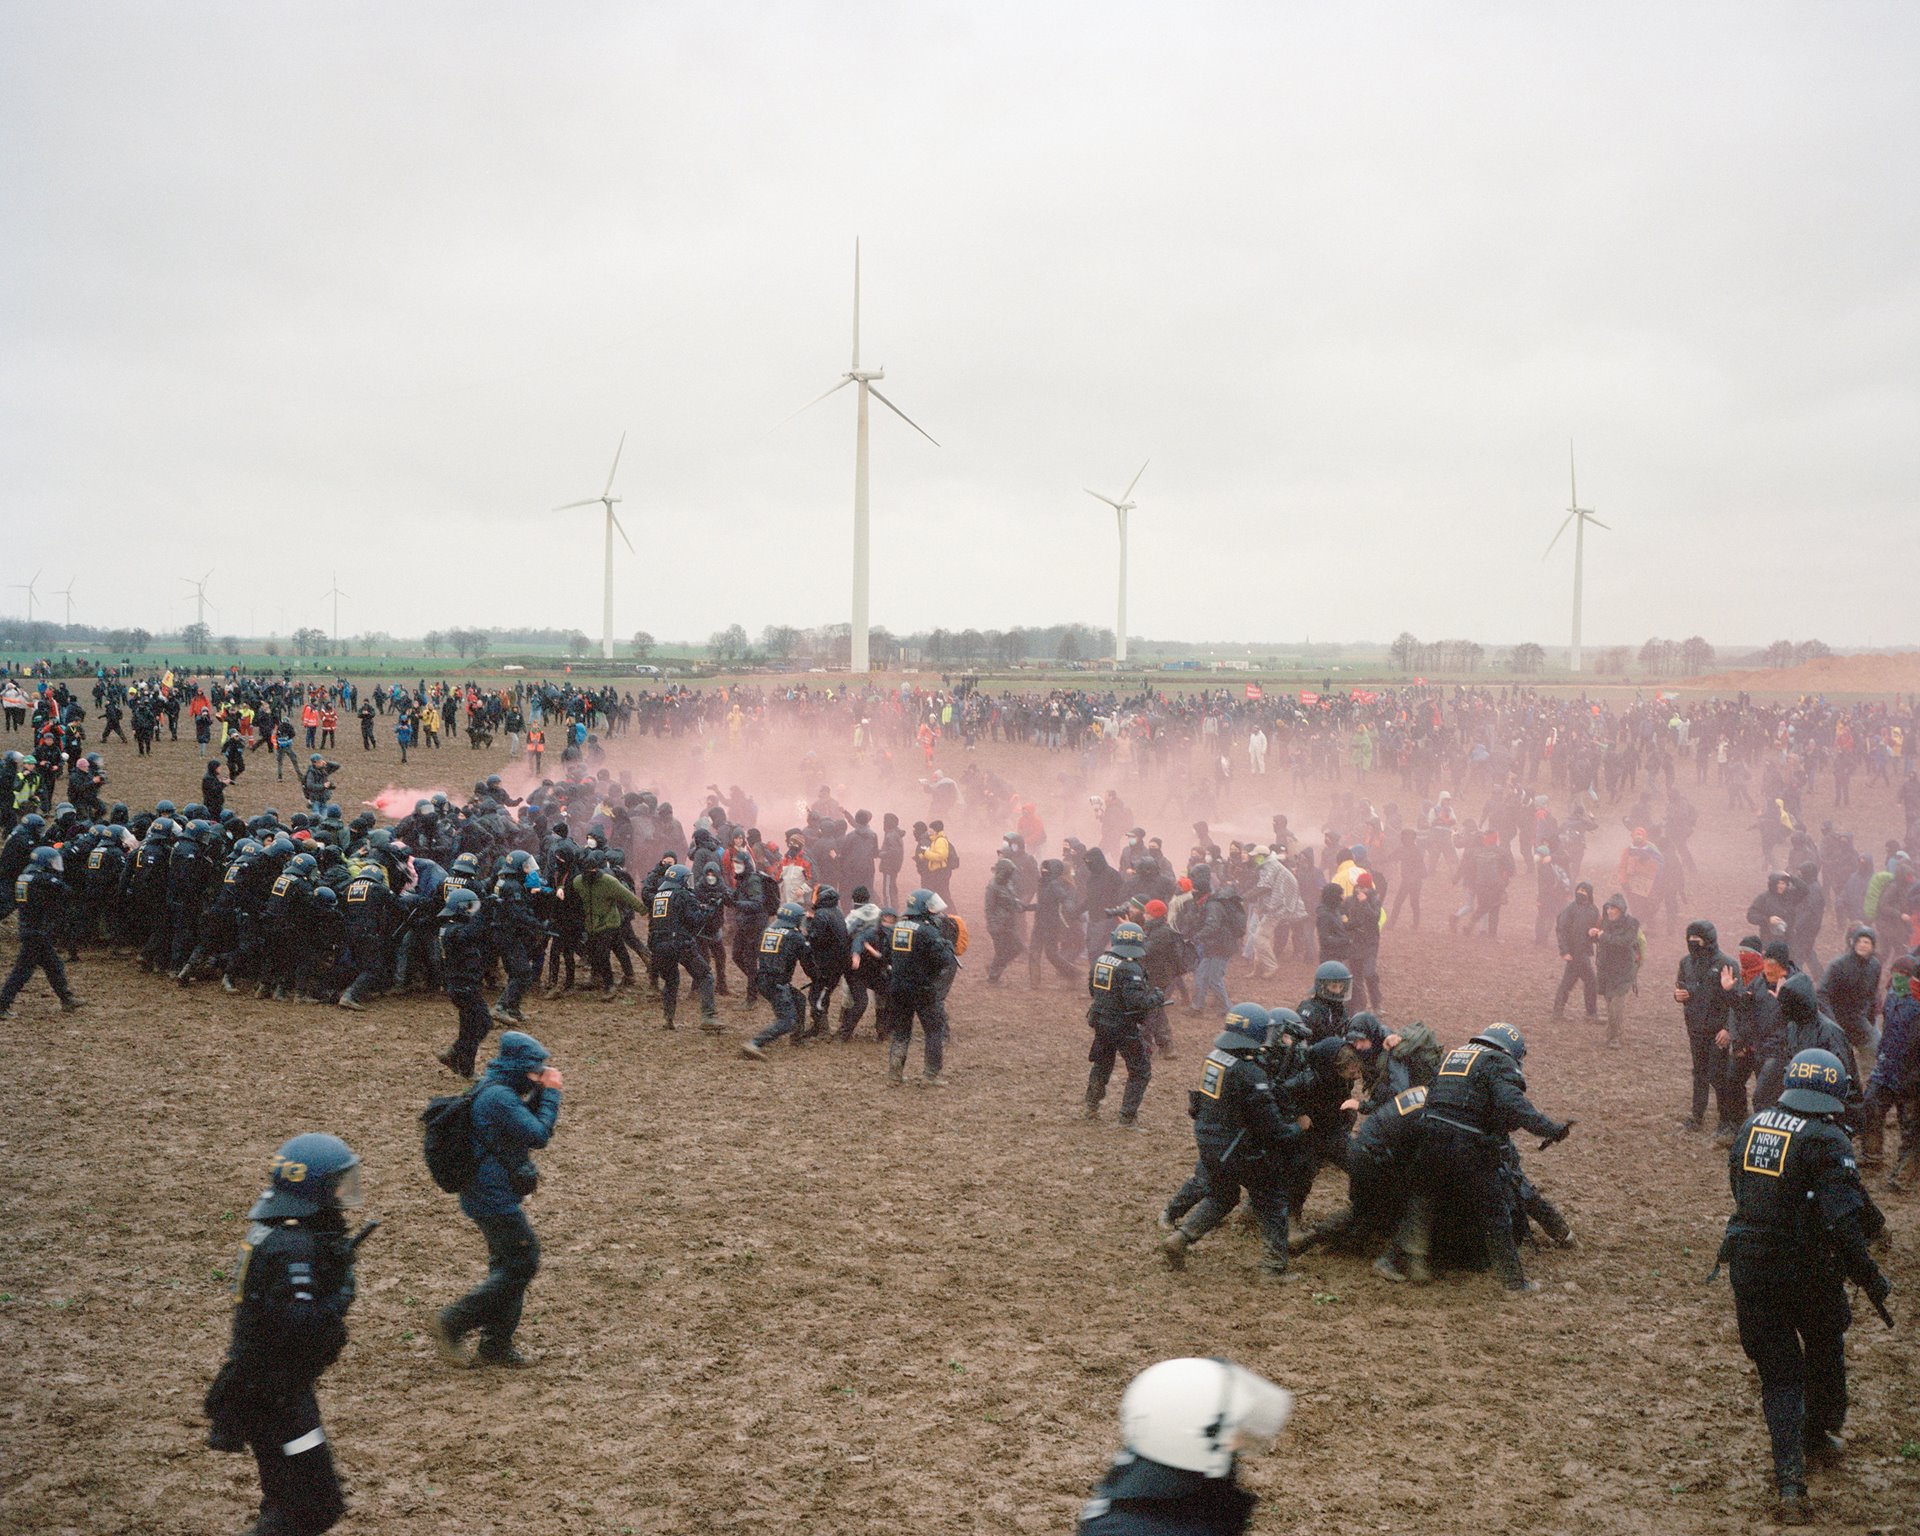 Police fend off demonstrators trying to storm the cordoned-off village of Keyenberg, Germany, during a protest march to save the village from demolition. Demonstrators estimated that around 35,000 people joined the protest, police officials said it was closer to 15,000. Keyenberg was scheduled for demolition in 2026, but was eventually saved by an agreement between energy company RWE and the German government.